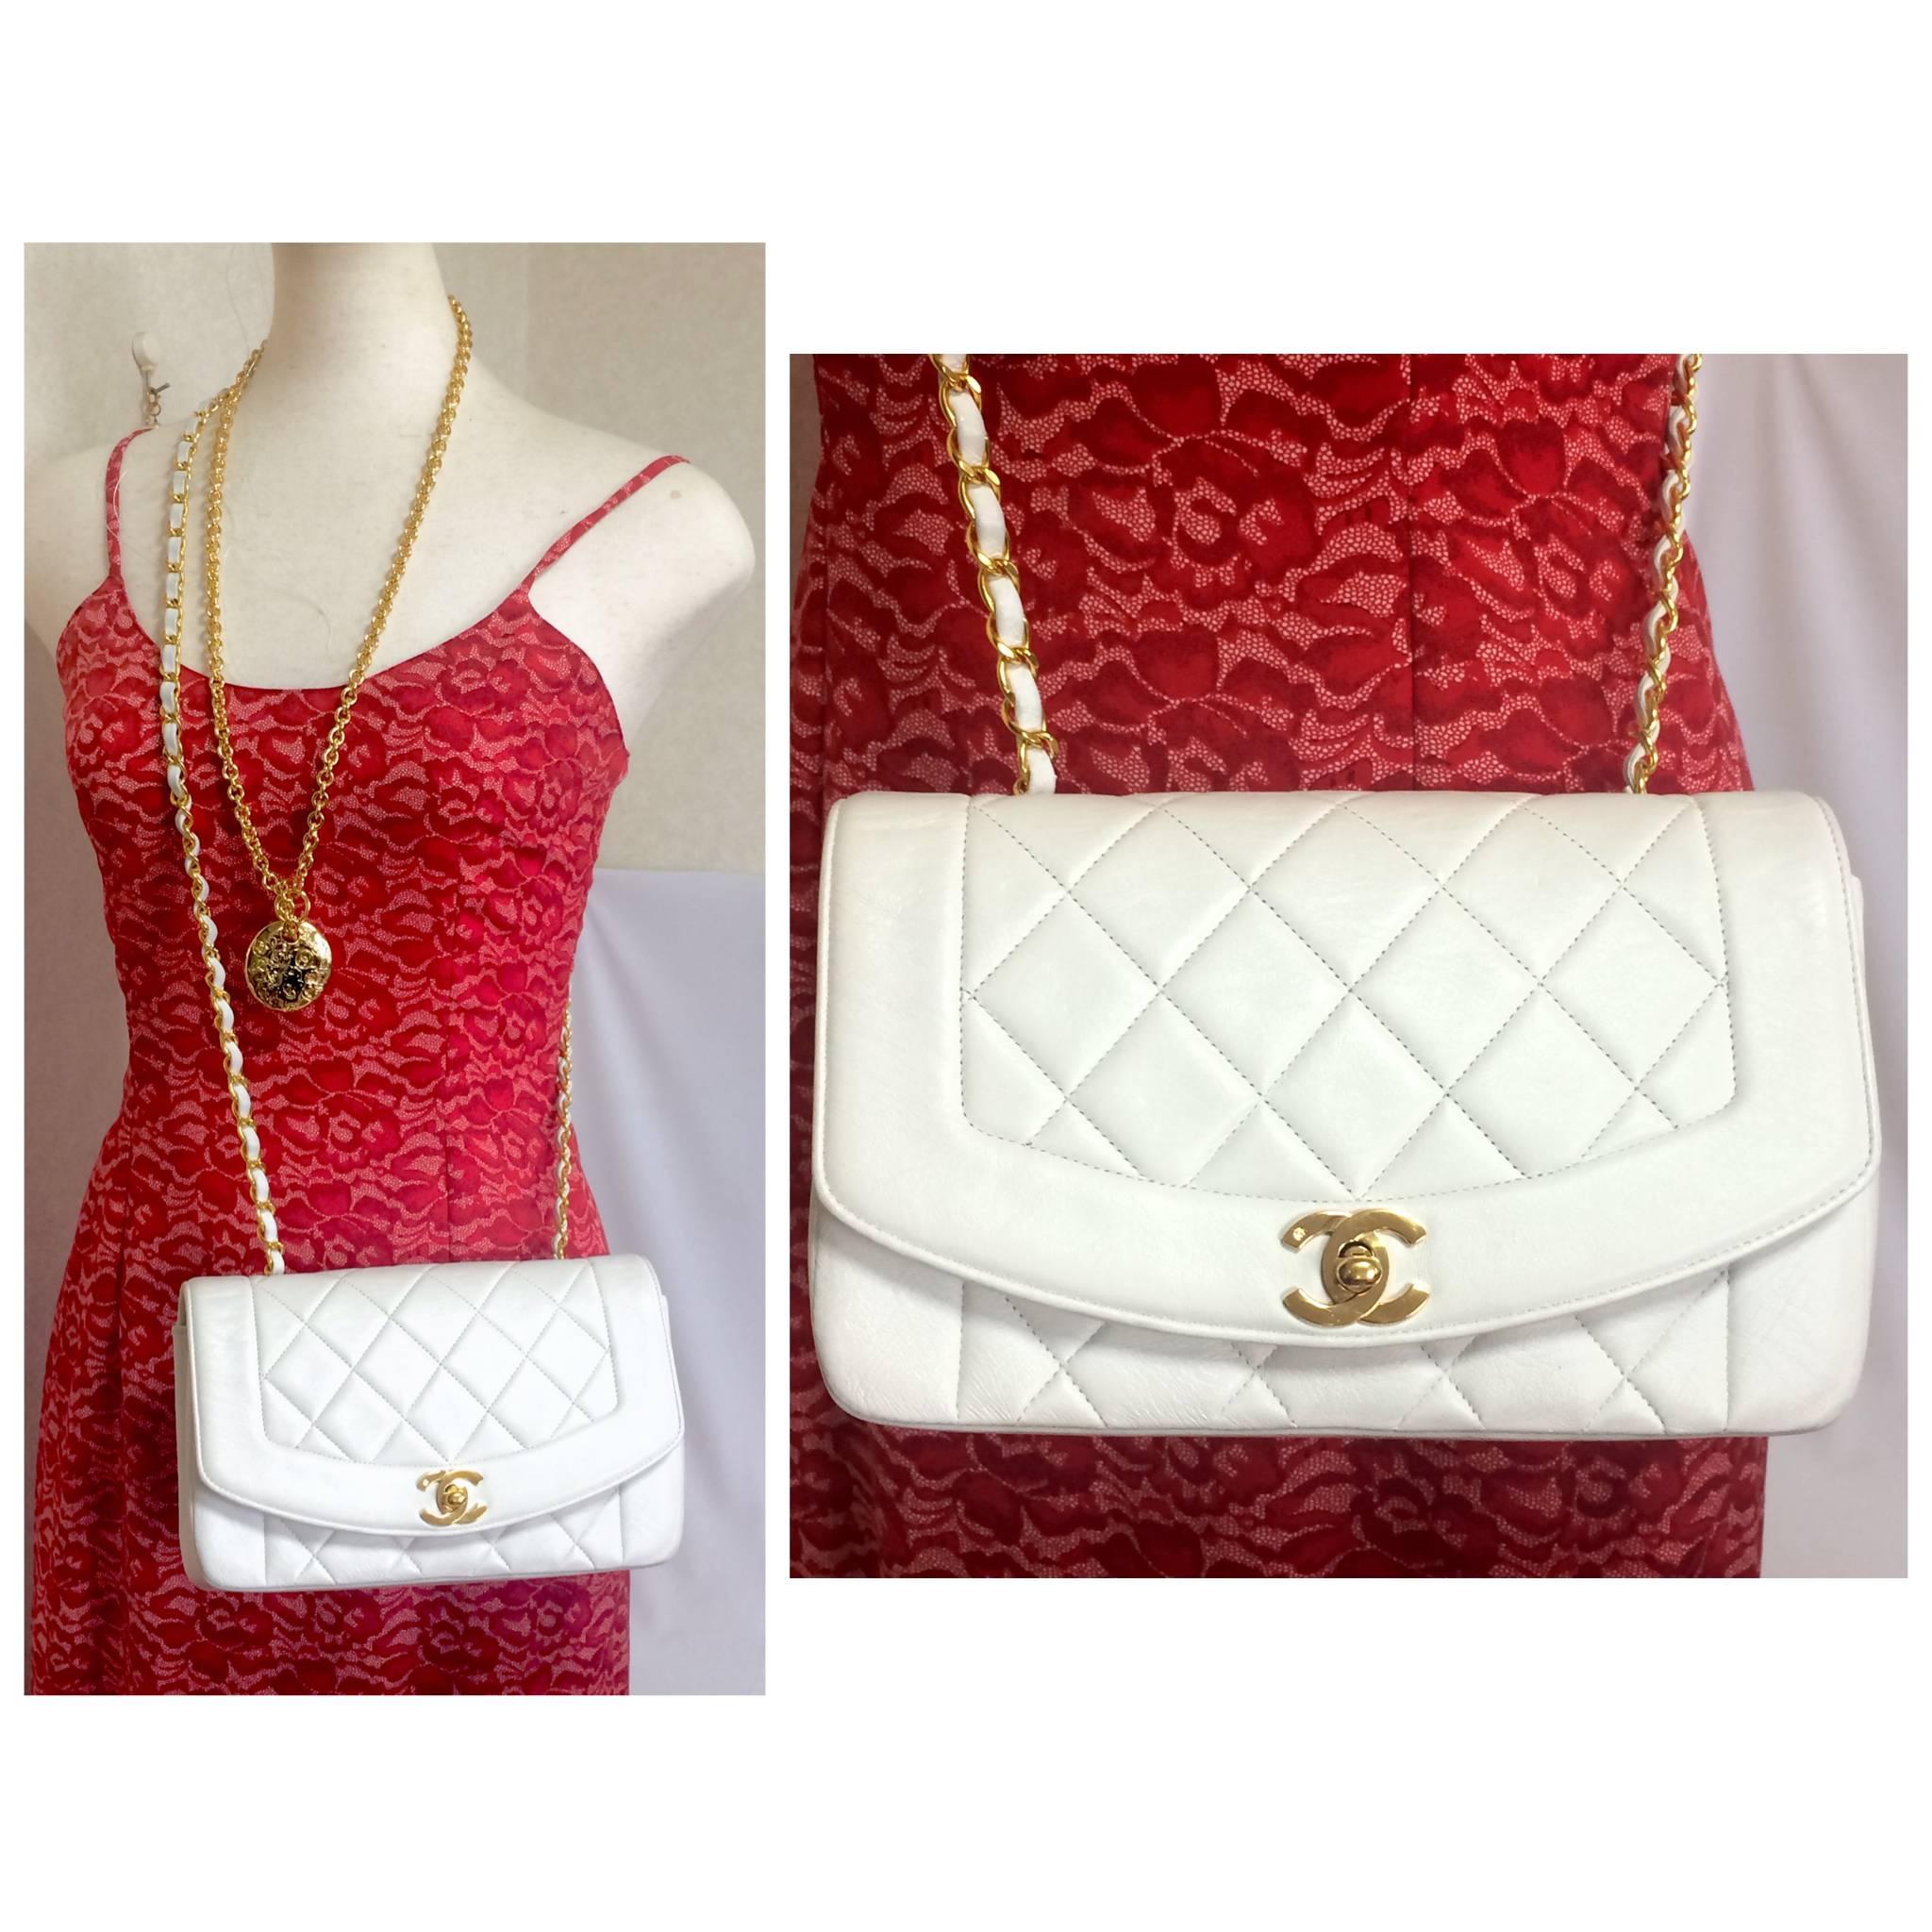 Vintage Chanel classic 2.55 white color lamb leather shoulder bag with gold CC. 5